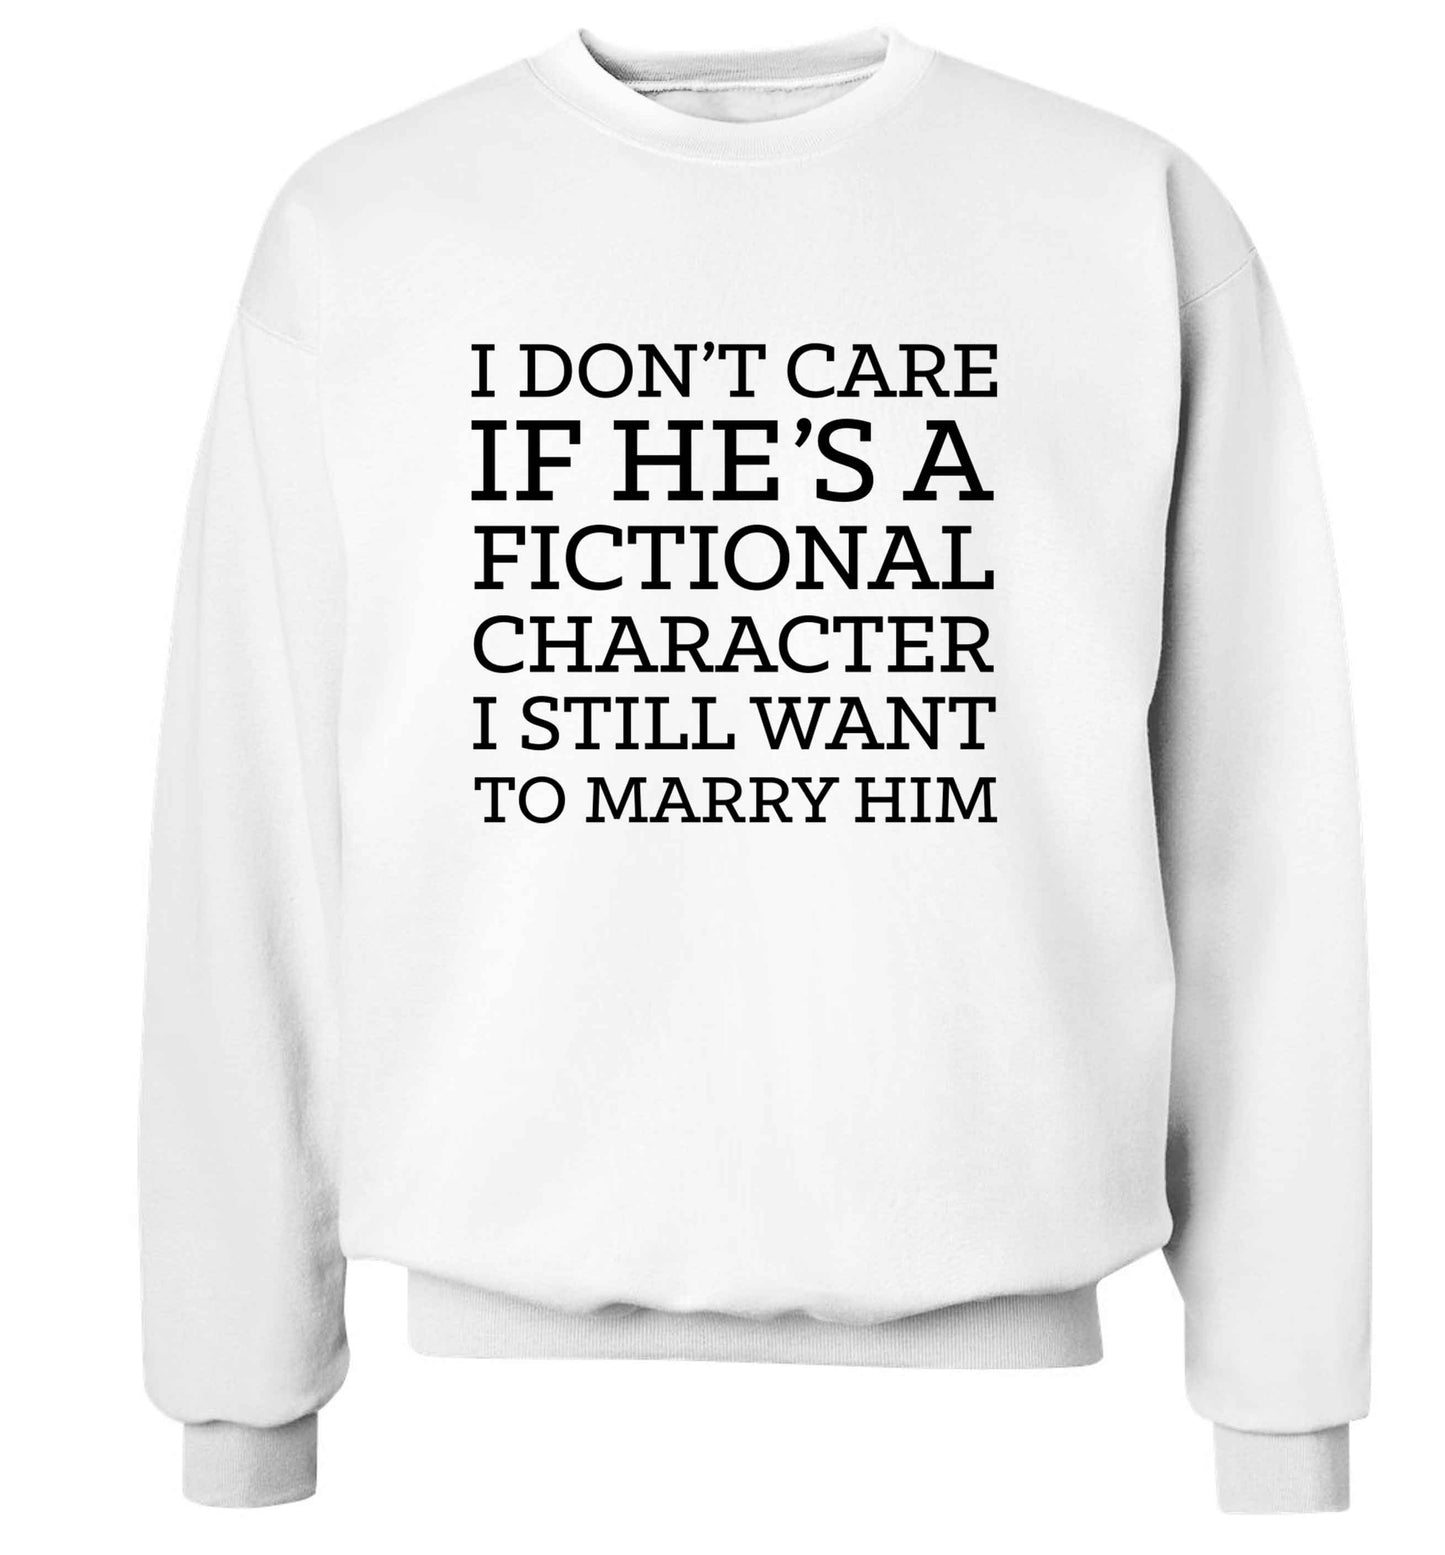 I don't care if he's a fictional character I still want to marry him adult's unisex white sweater 2XL